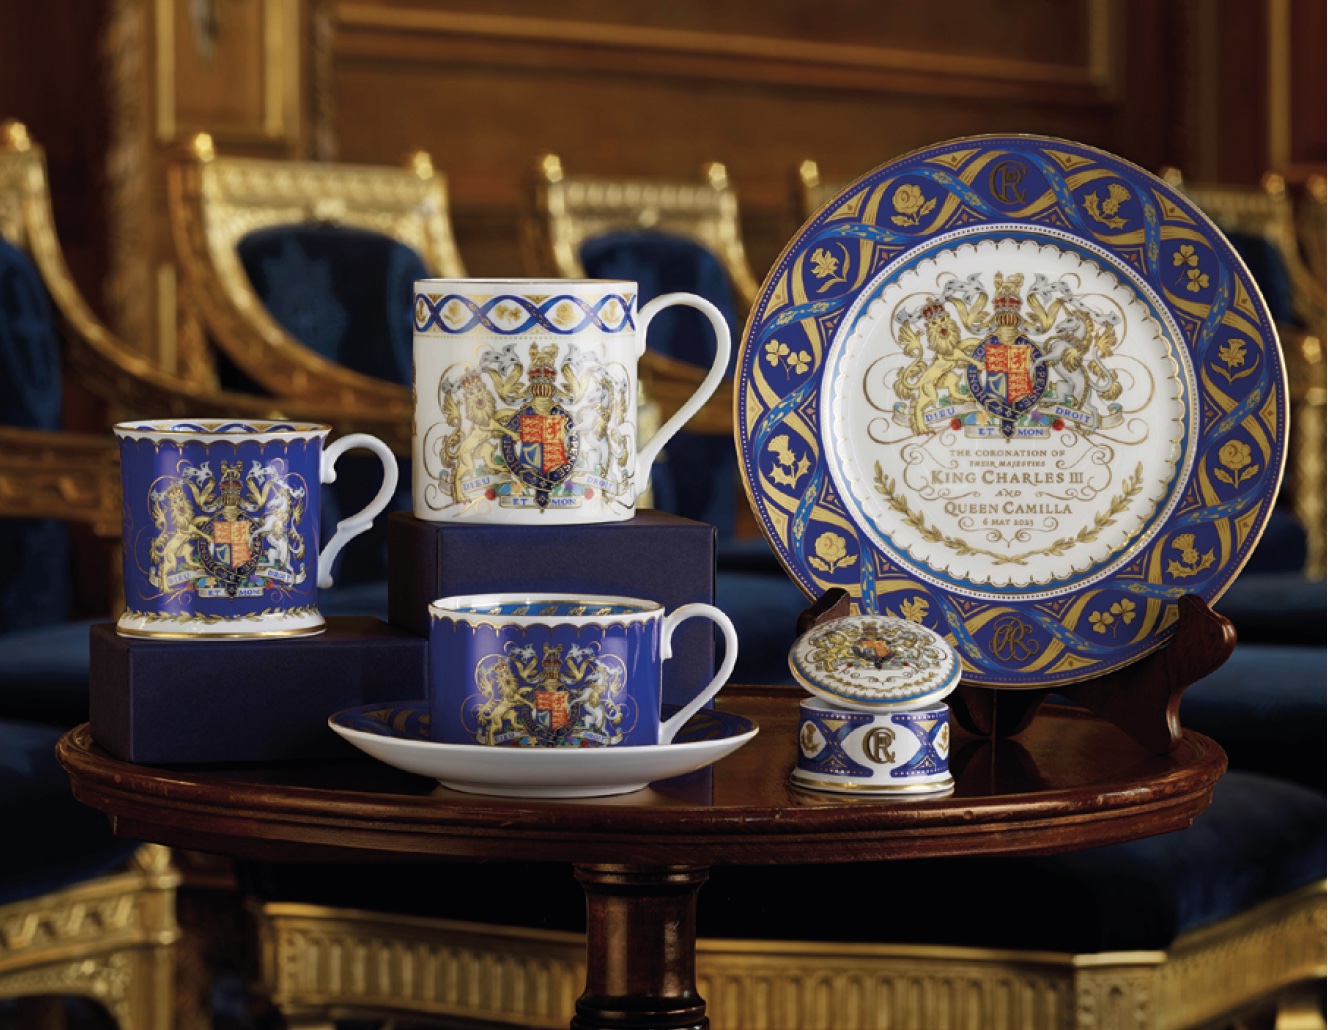 Commemorative wares for the coronation of King Charles III